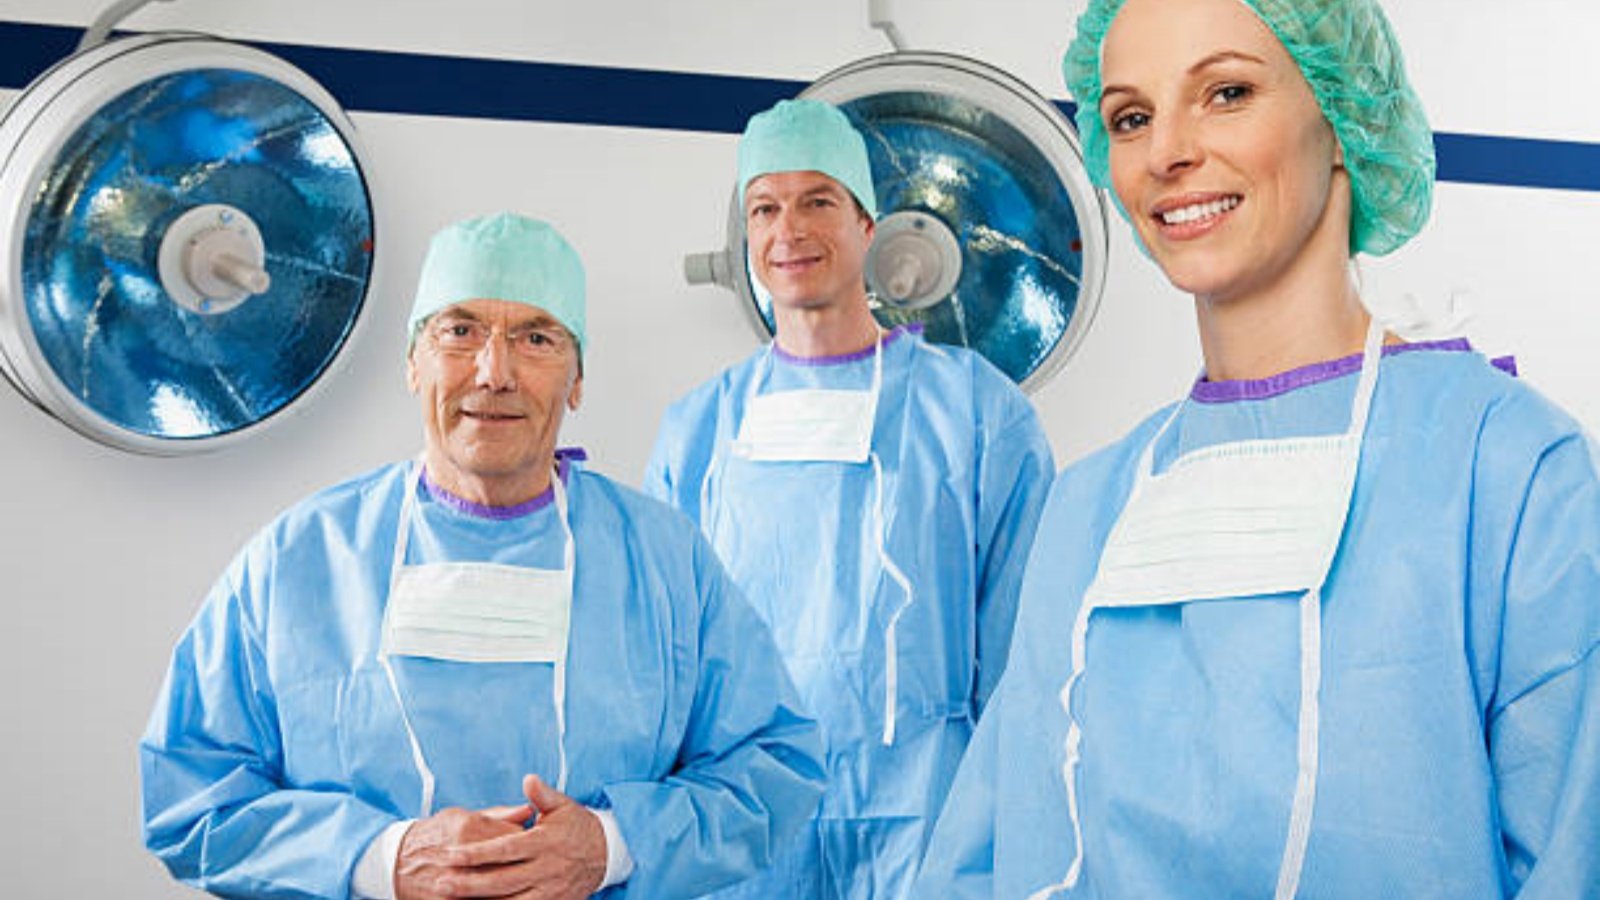 Surgical Gowns Material: An In-depth Look at the Different Aspects